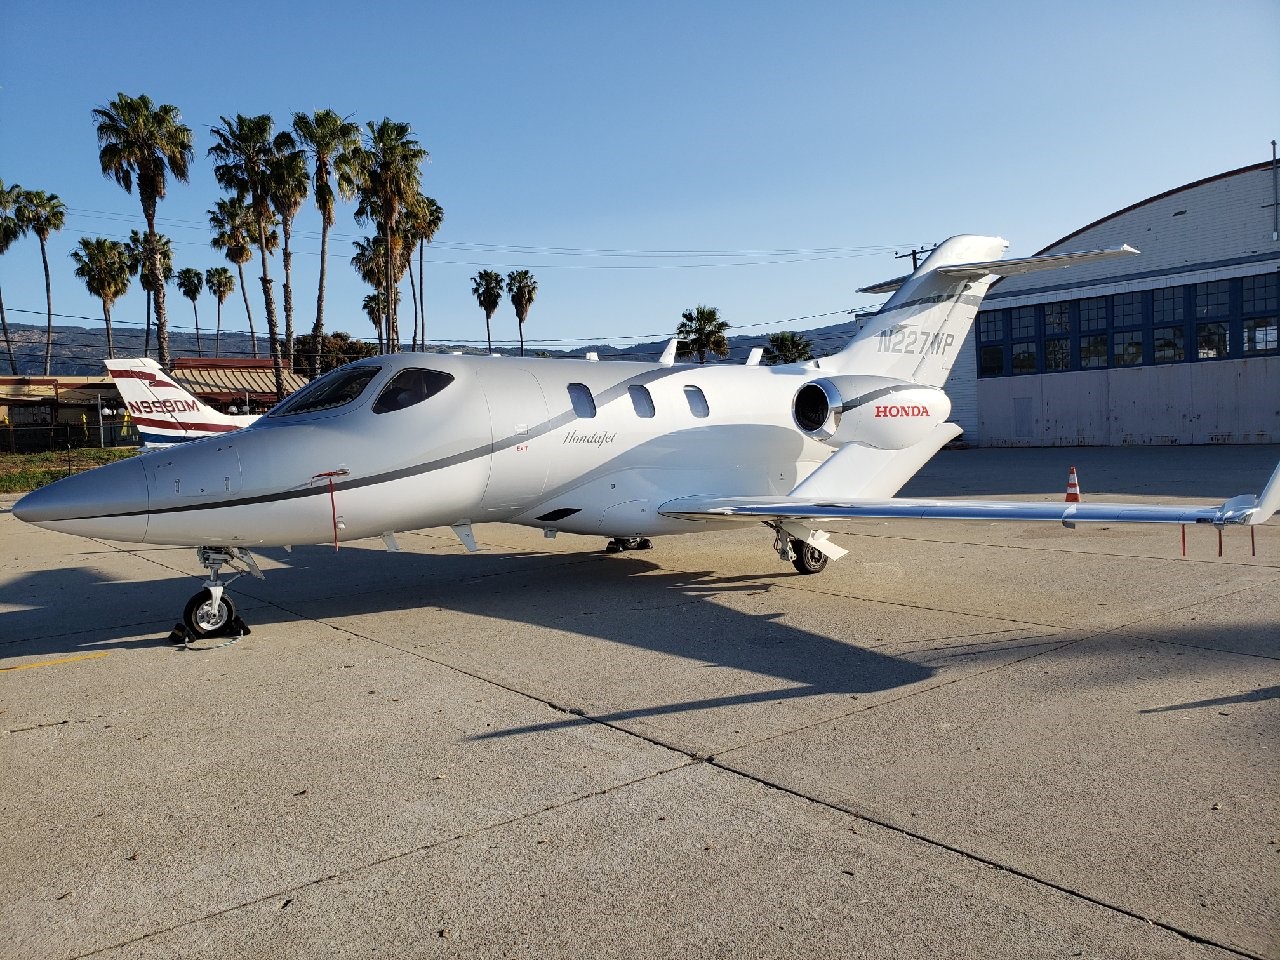 Michael Avenatti's jet, which was seized at Santa Barbara Airport on Wednesday (Photo courtesy of United States Attorney’s Office Central District of California (Los Angeles))